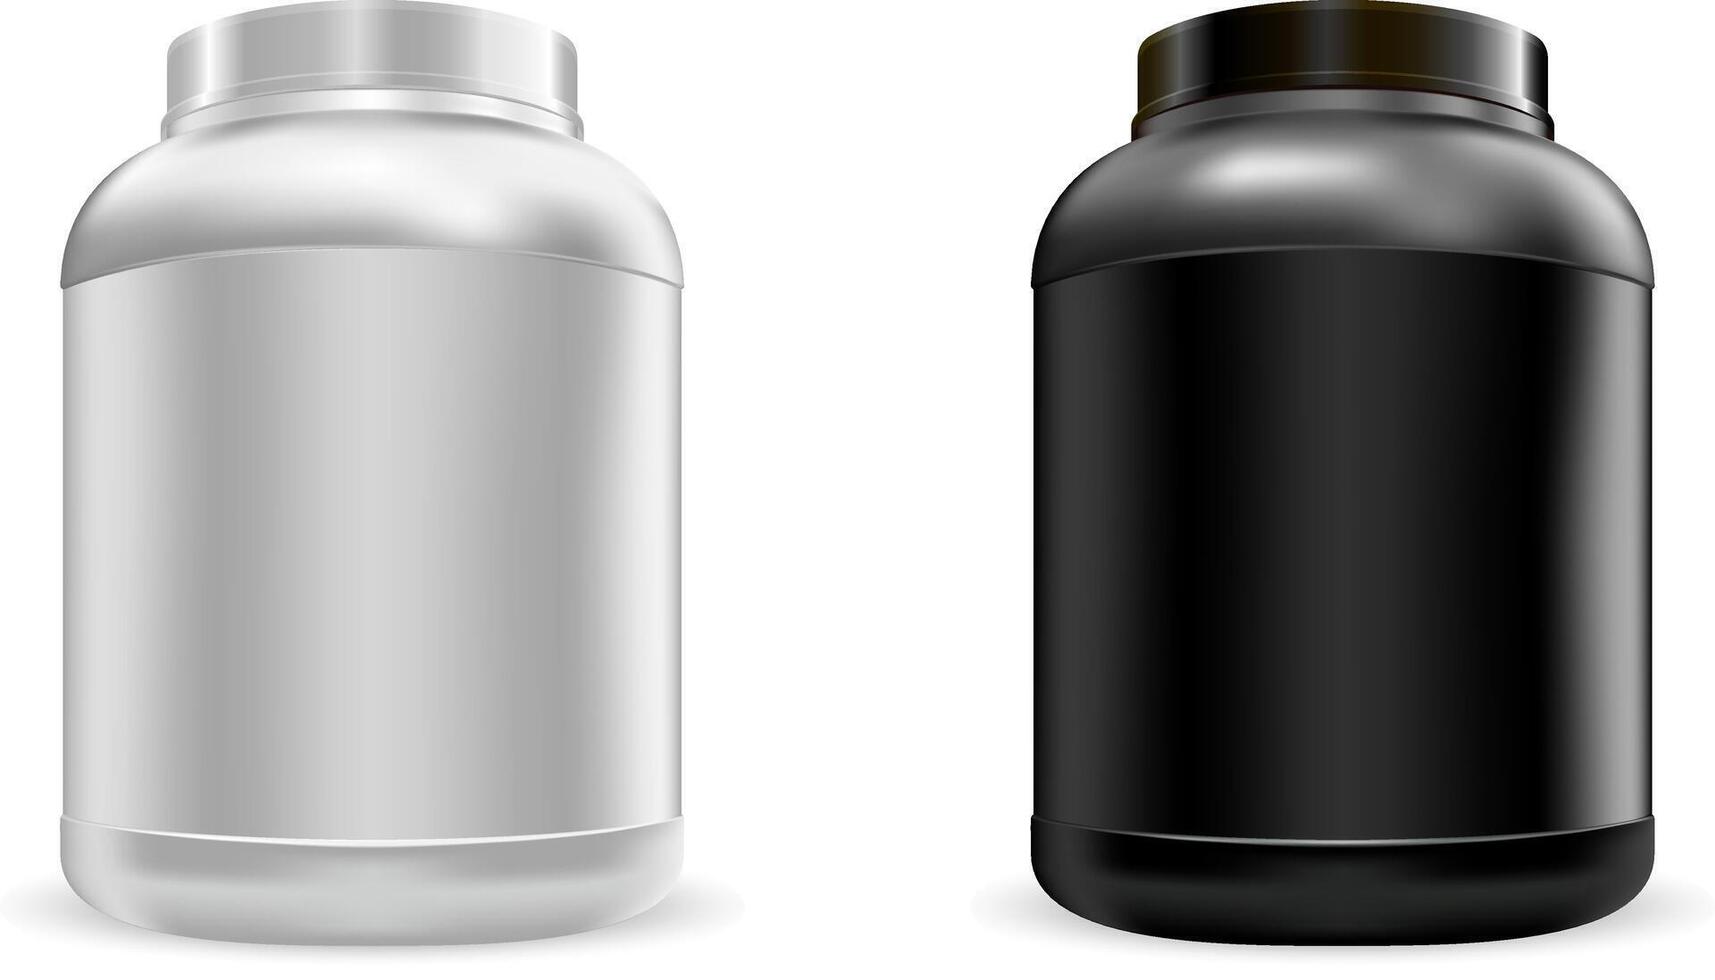 Big protein nutrition jars mockup set. Sports food gainer can. whey protein bottles template in black and white color. vector